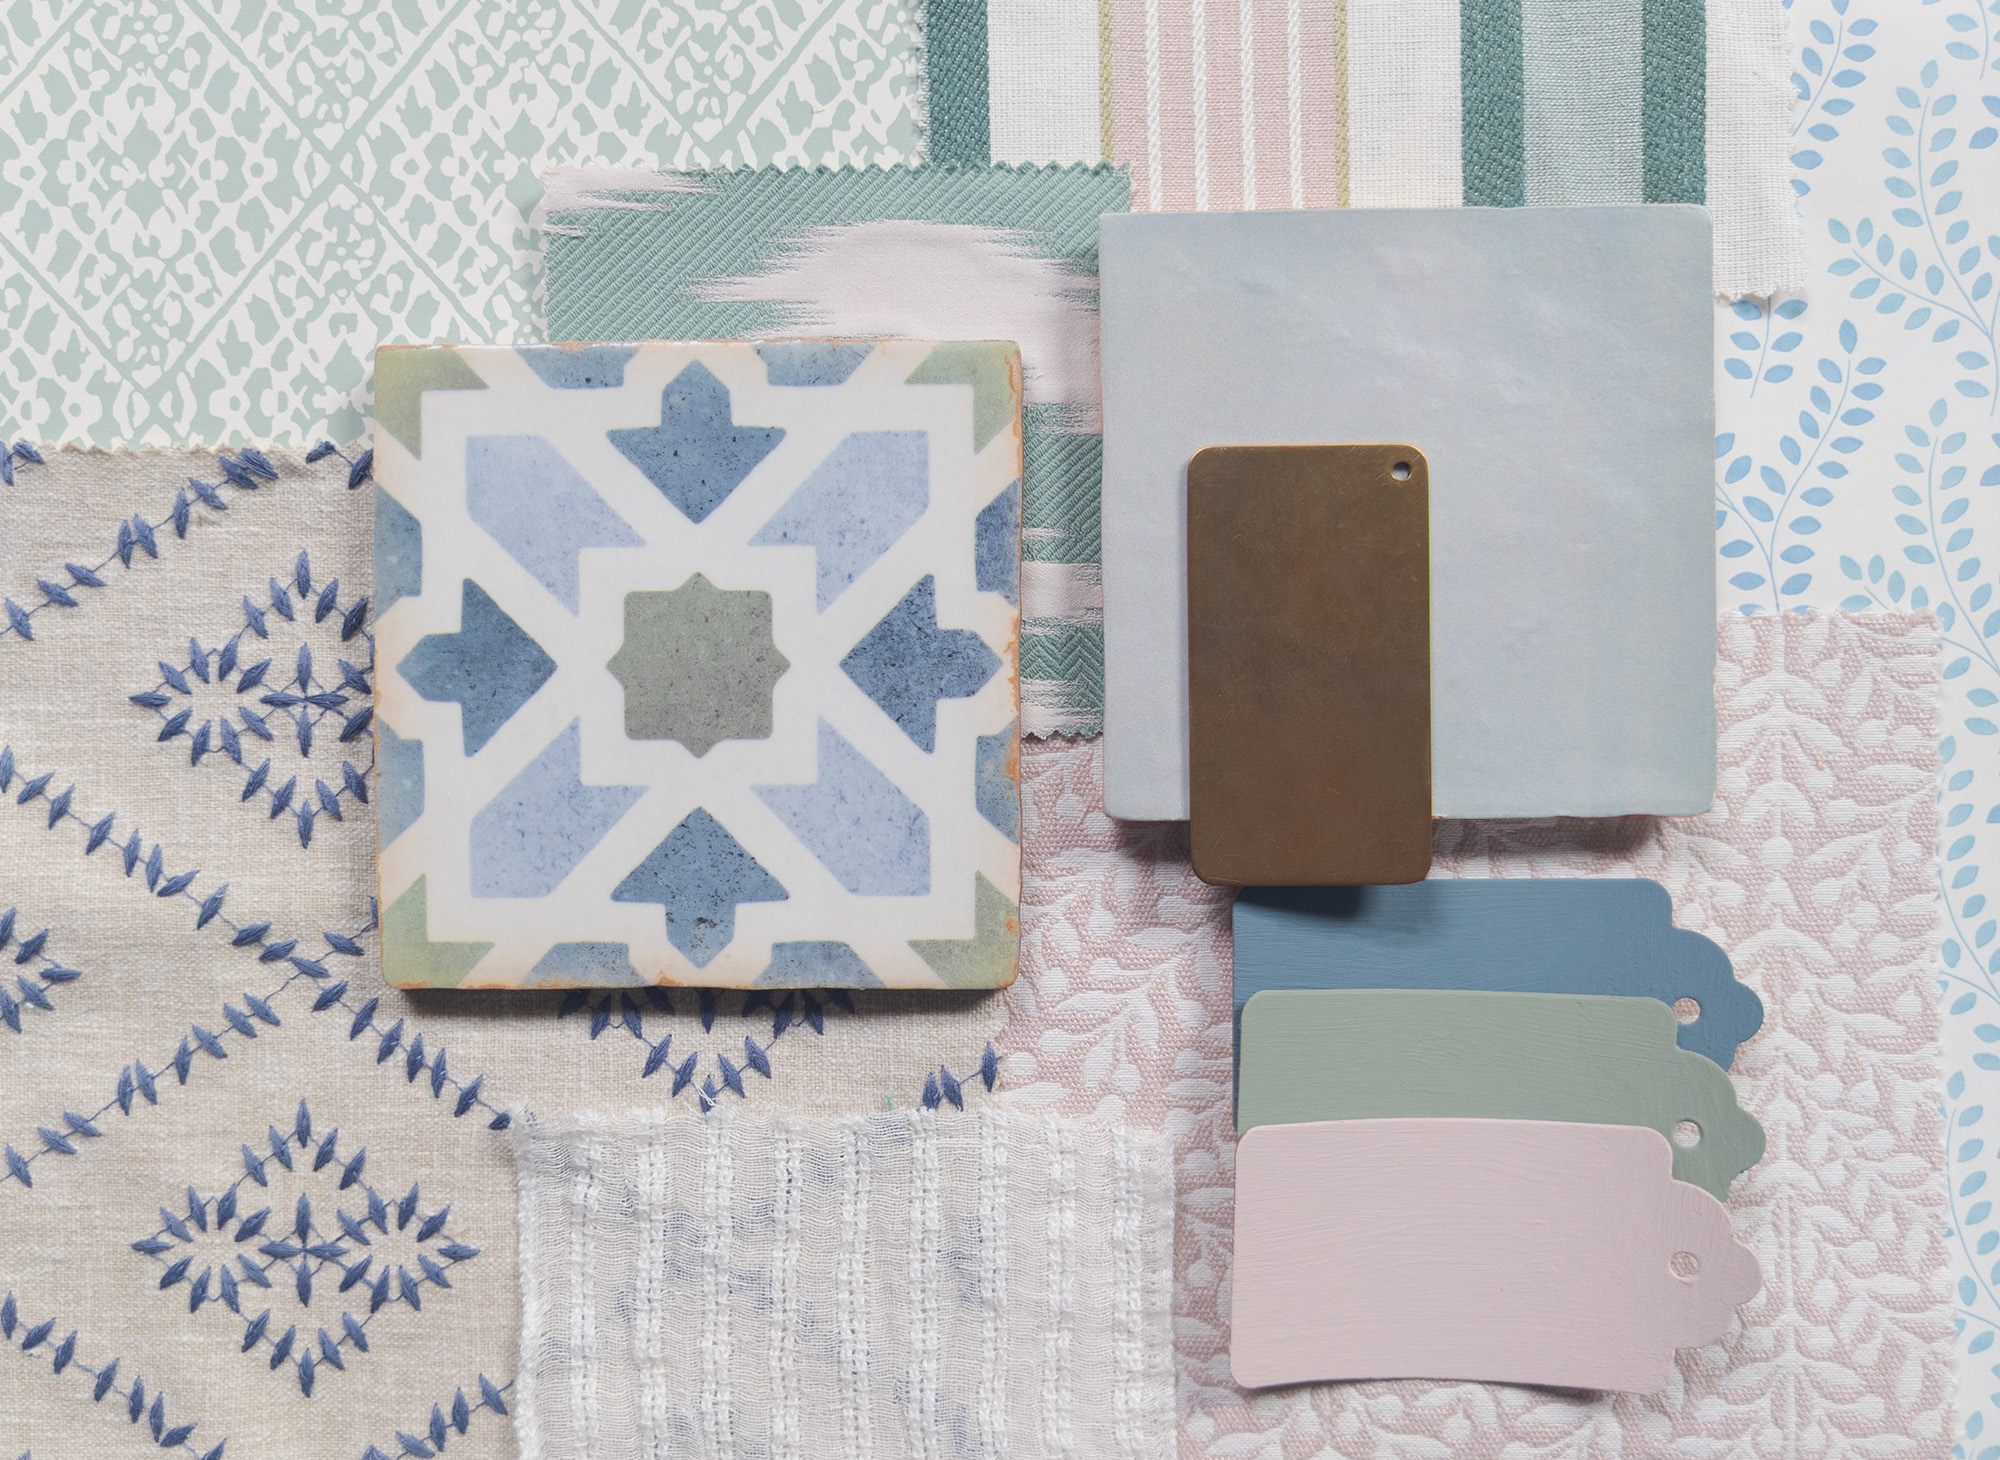 A photo of some fabric, wallpaper and tile samples arranged together.